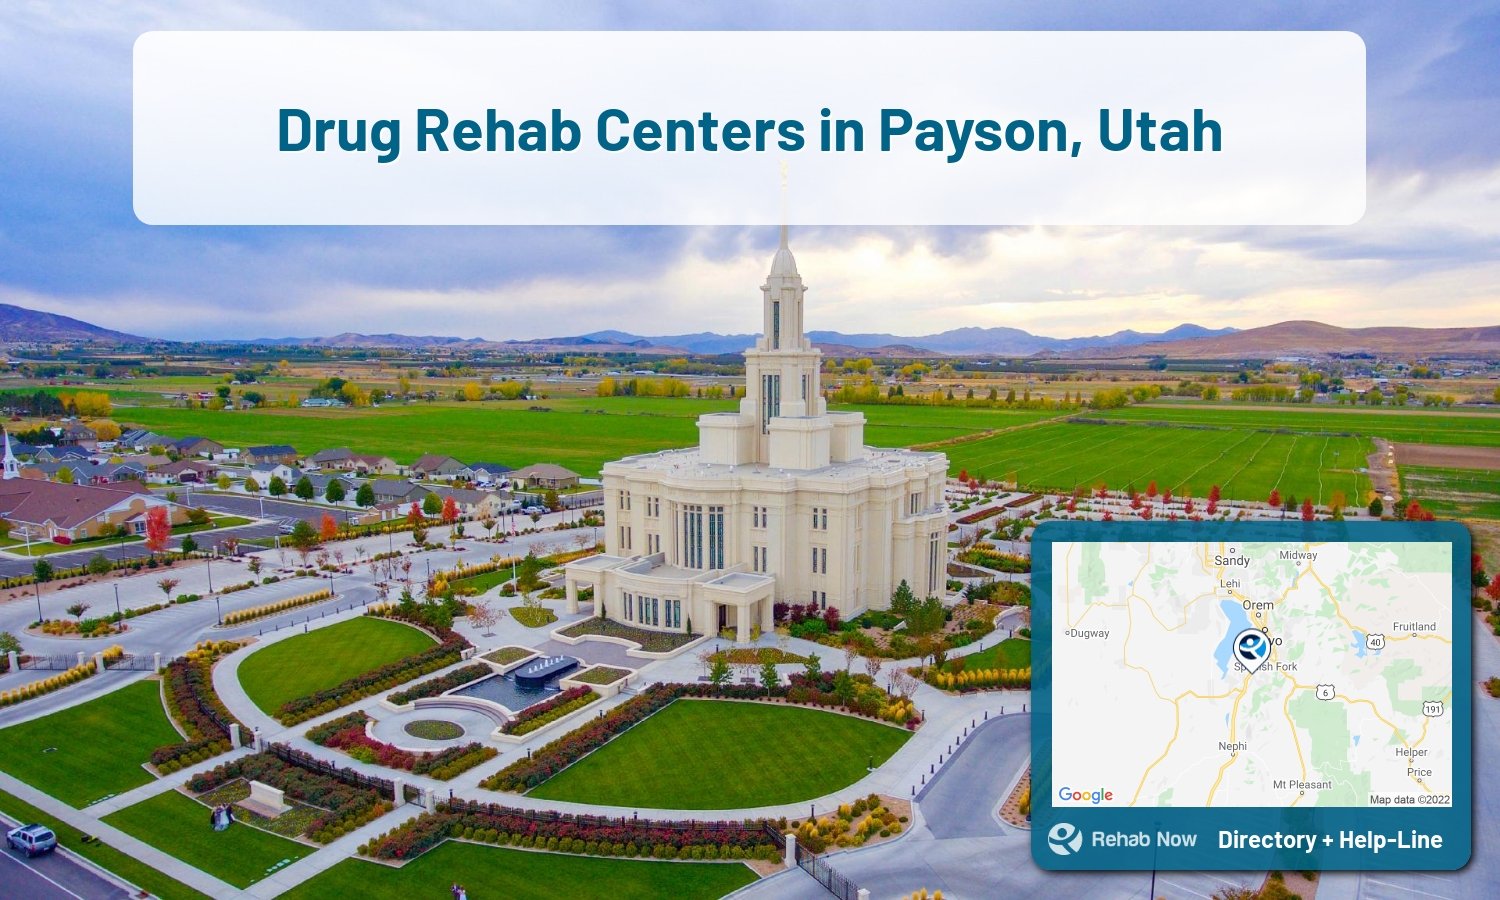 Payson, UT Treatment Centers. Find drug rehab in Payson, Utah, or detox and treatment programs. Get the right help now!